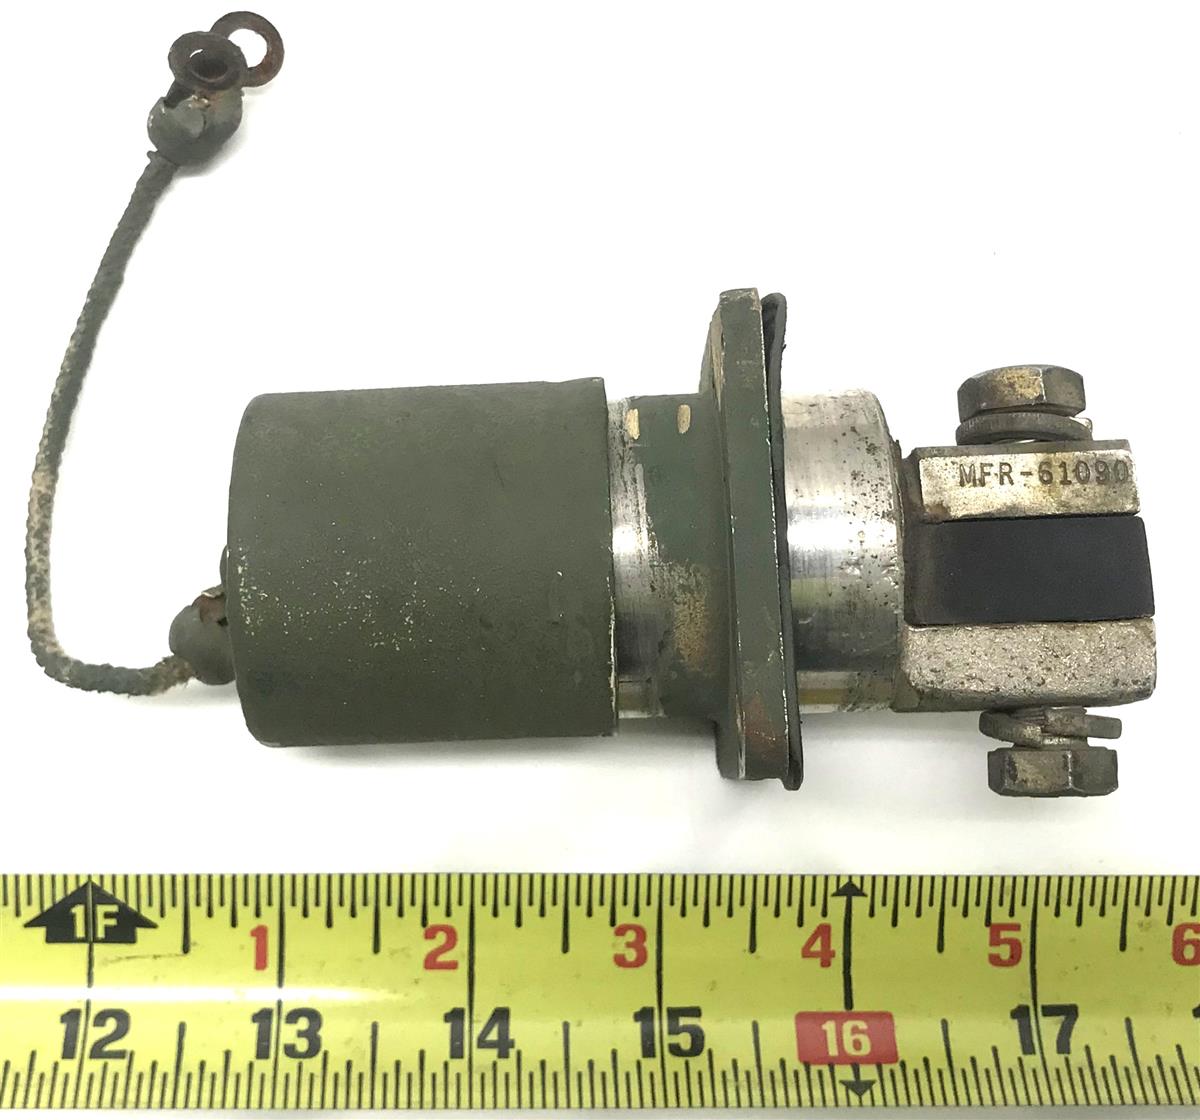 COM-3302 | COM-3302 Receptacle Electrical Slave Connector Used (5).jpg